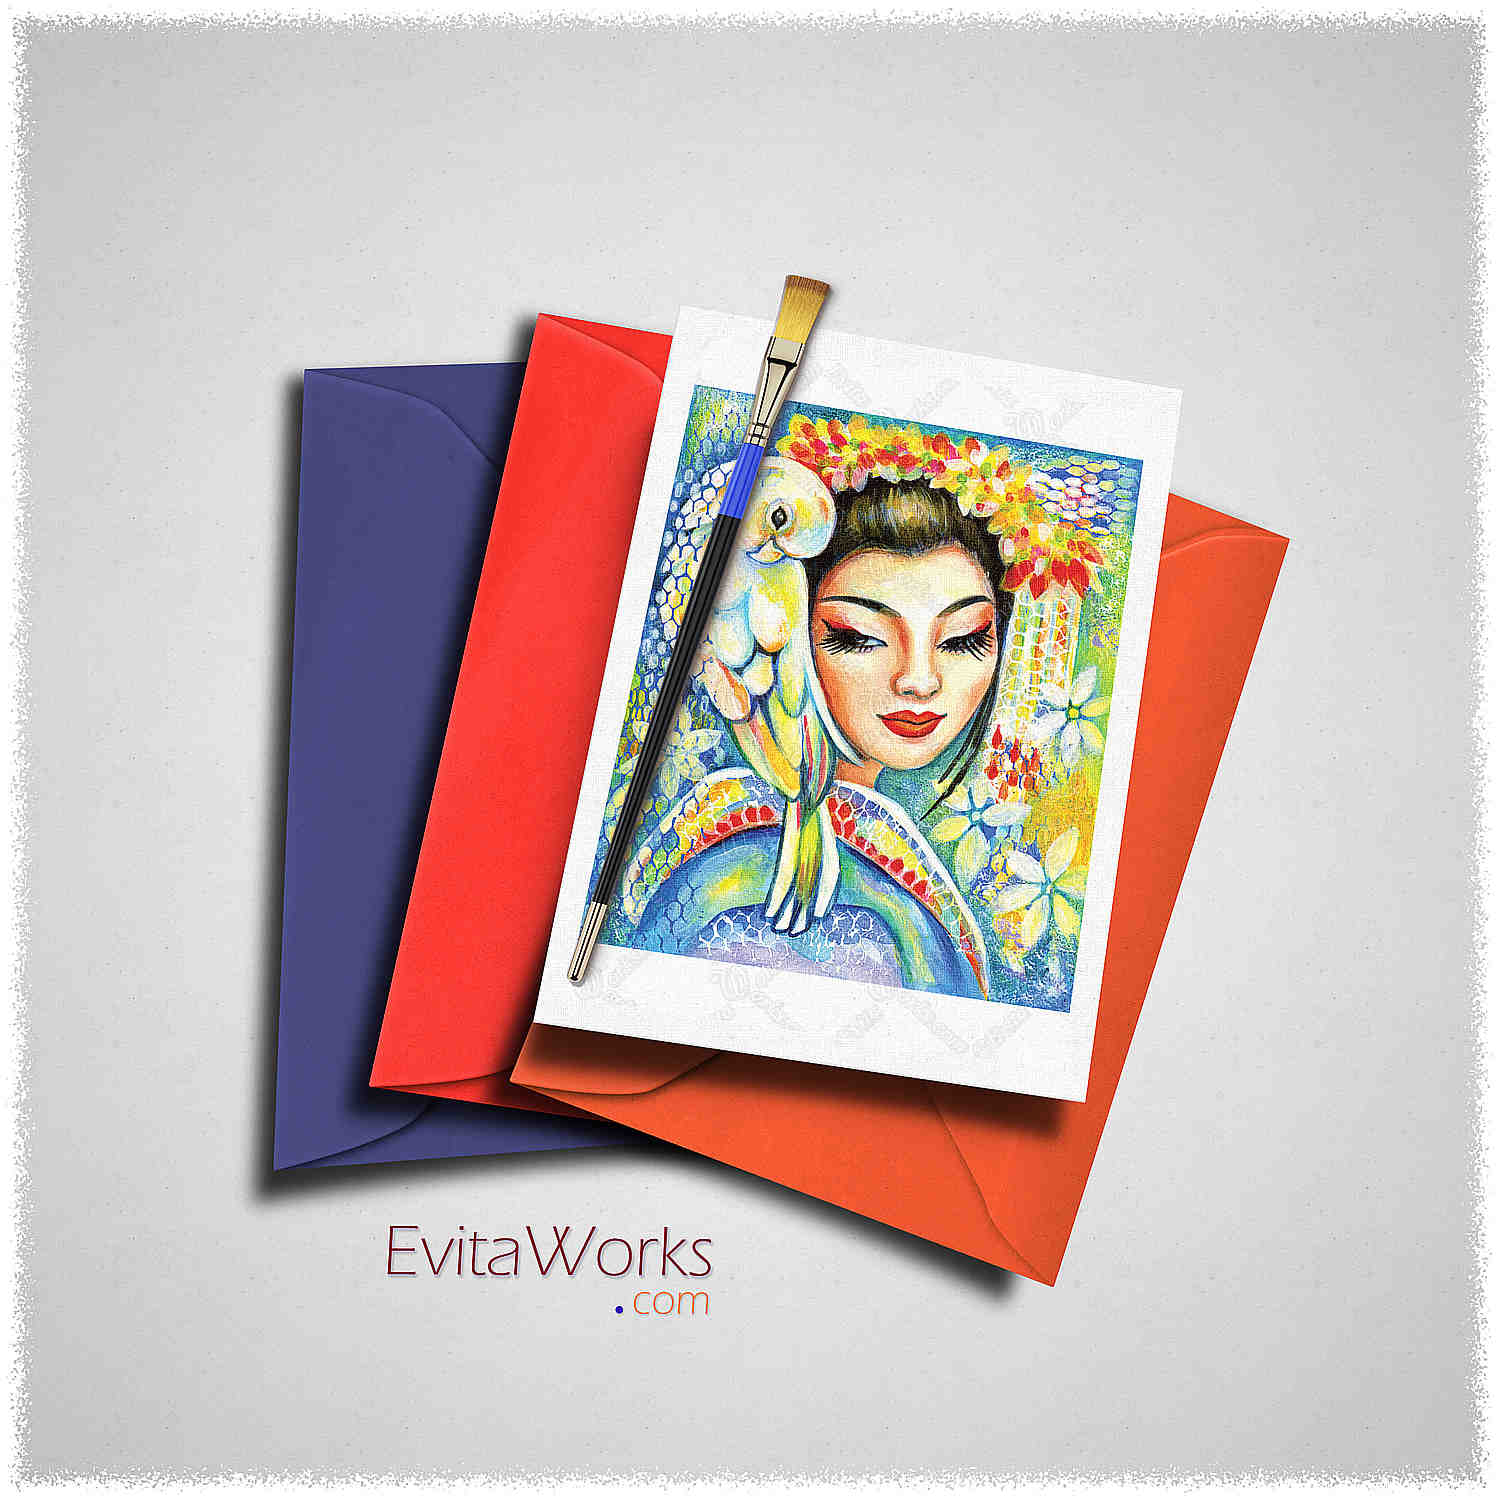 Hit to learn about "Harmony, beautiful Asian art" on cards